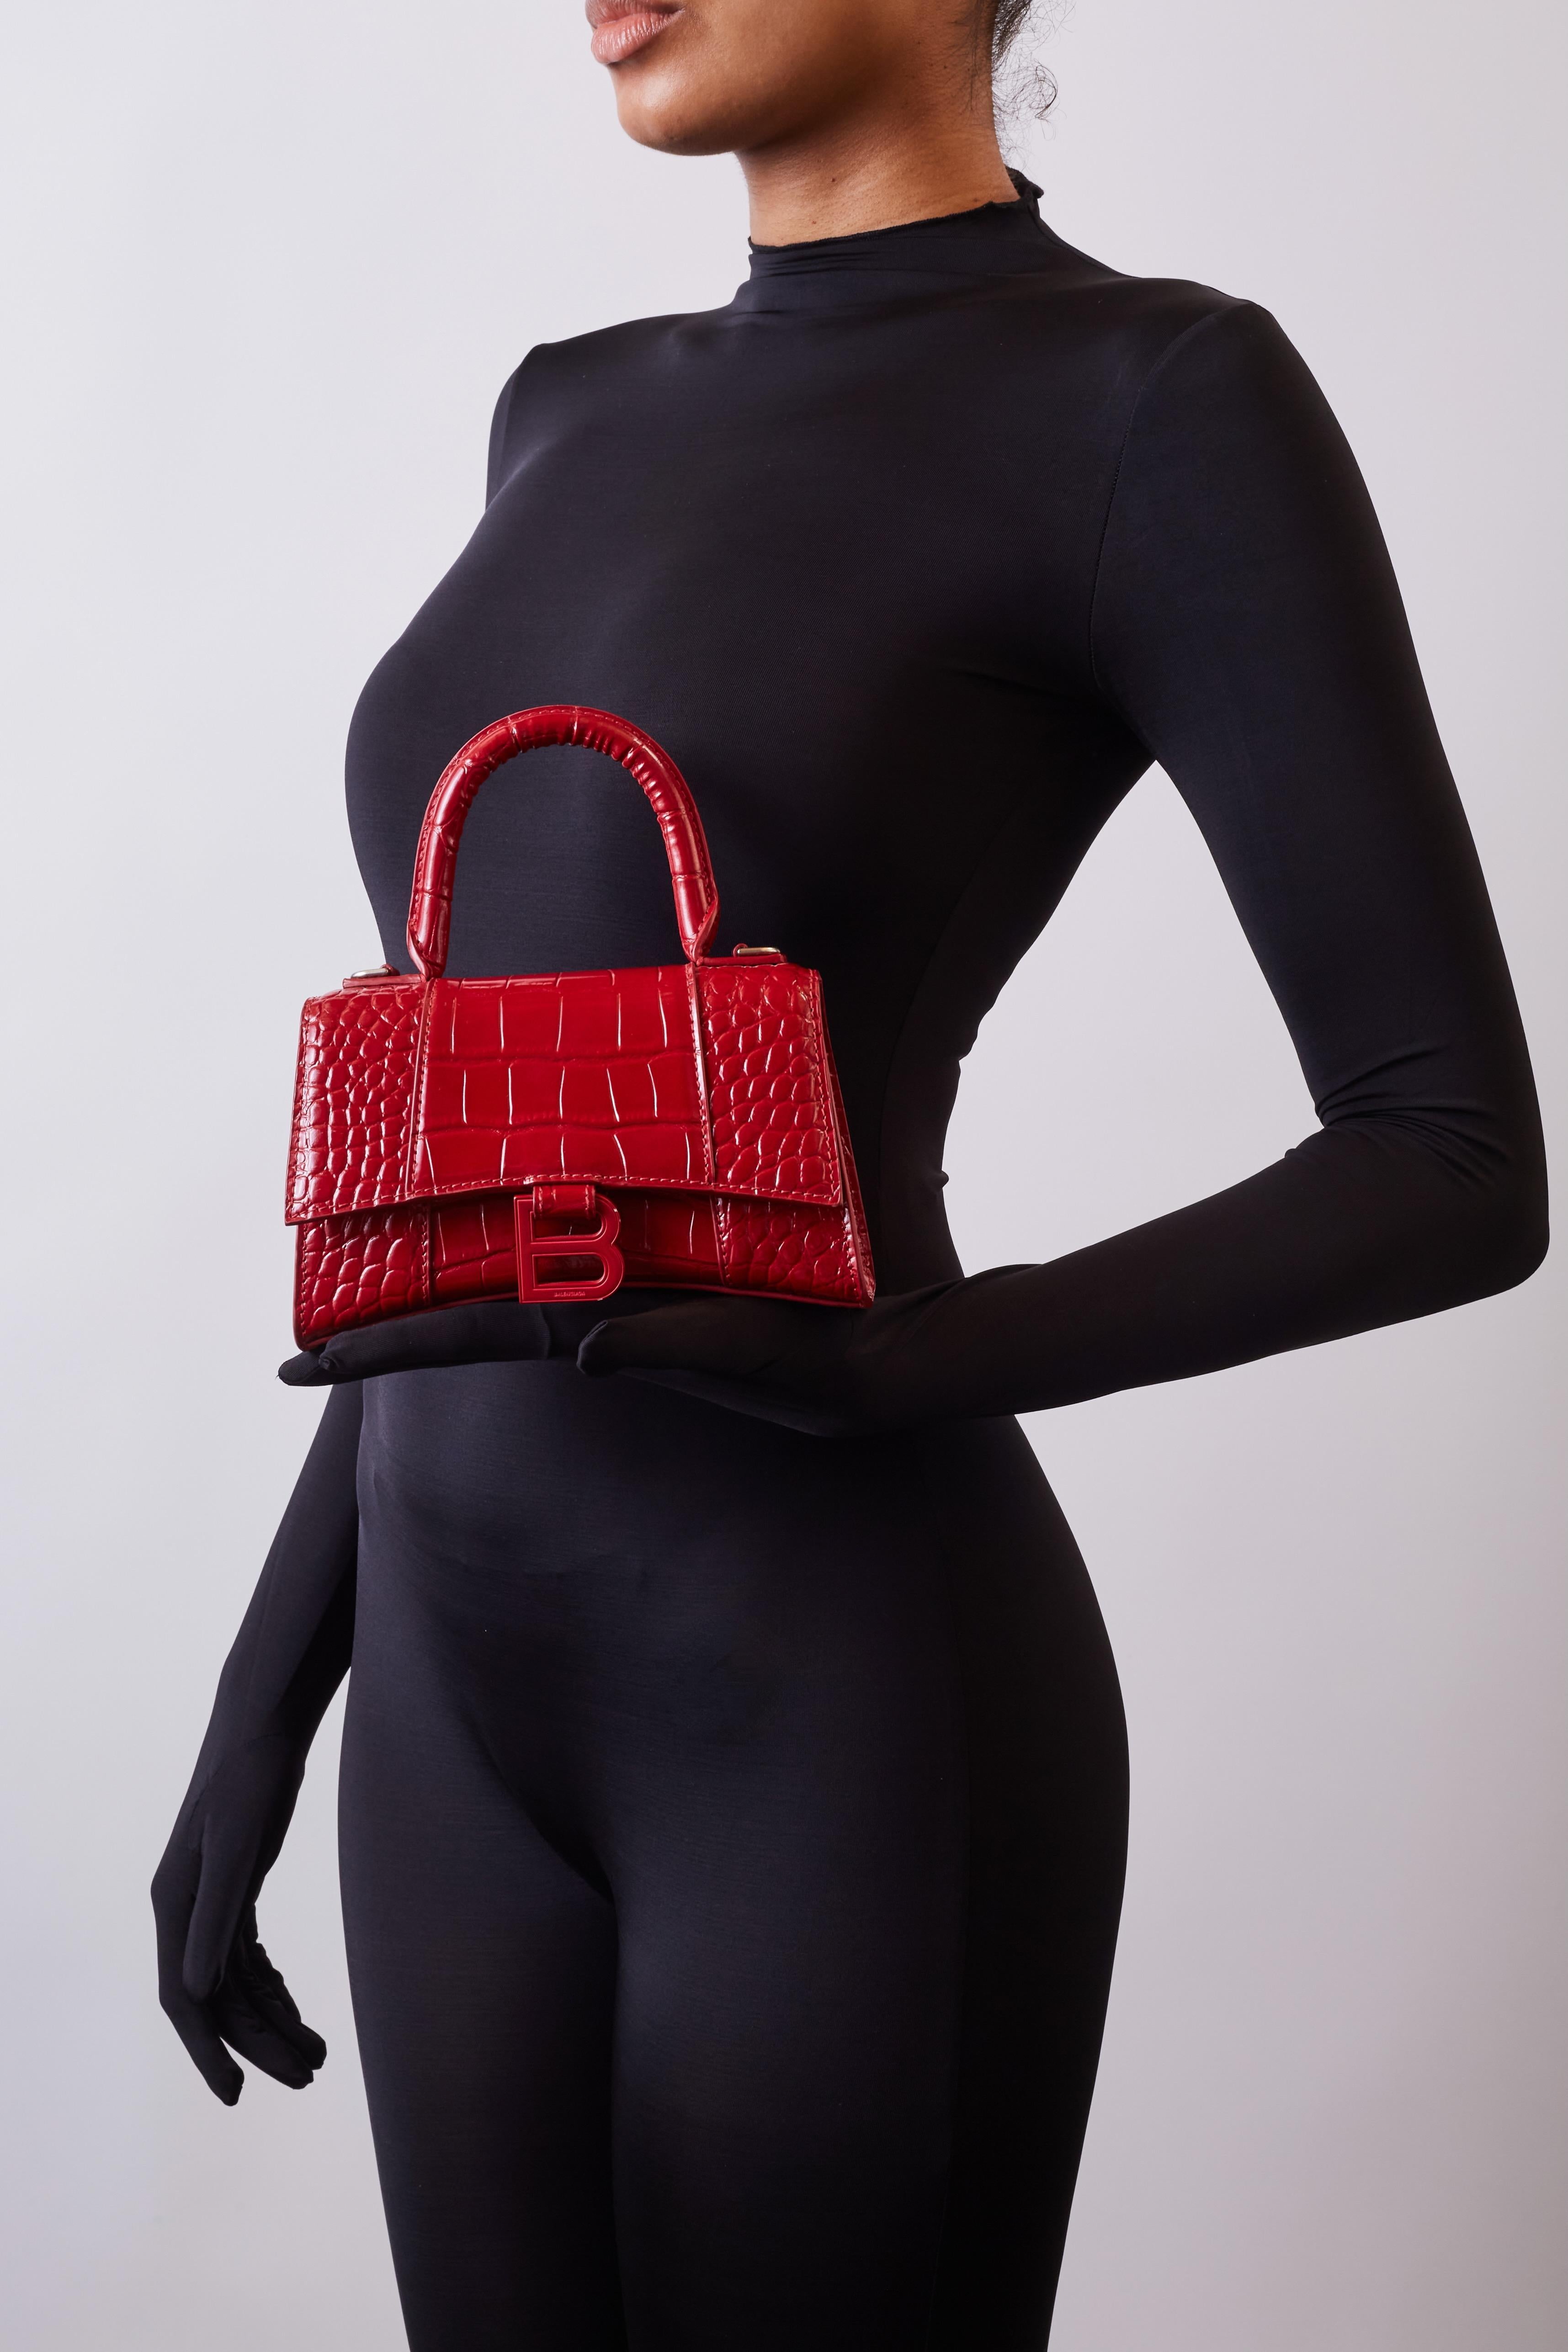 Balenciaga Croc-embossed Leather Red Hourglass Bag Extra Small In Good Condition For Sale In Montreal, Quebec